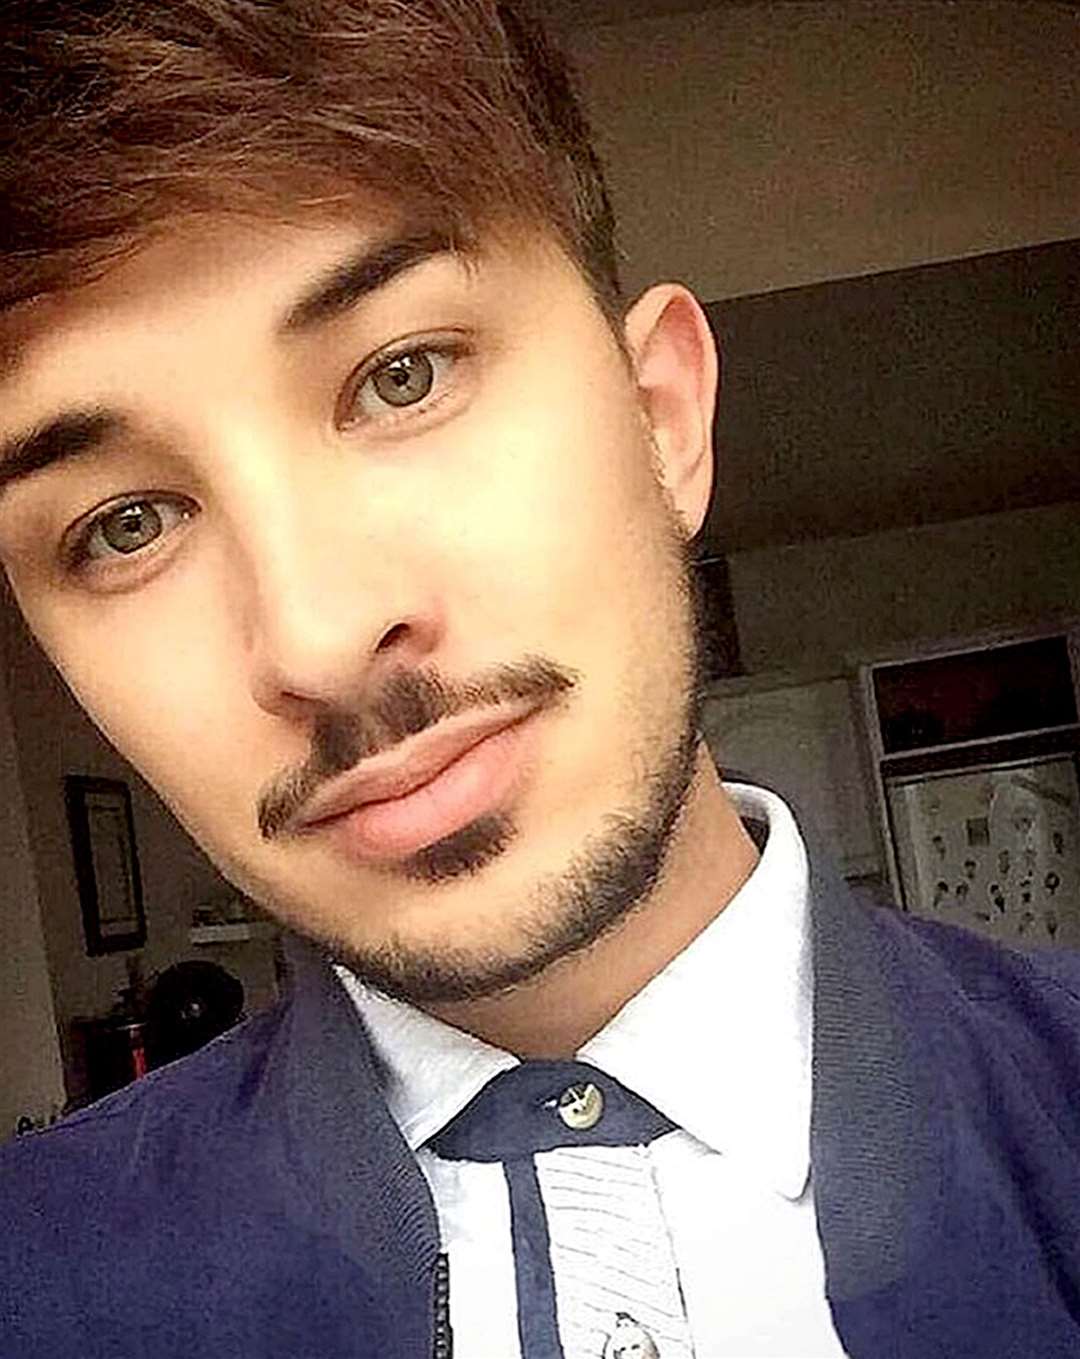 Martyn Hett who was among the 22 killed in the Manchester Arena terror attack (Greater Manchester Police)